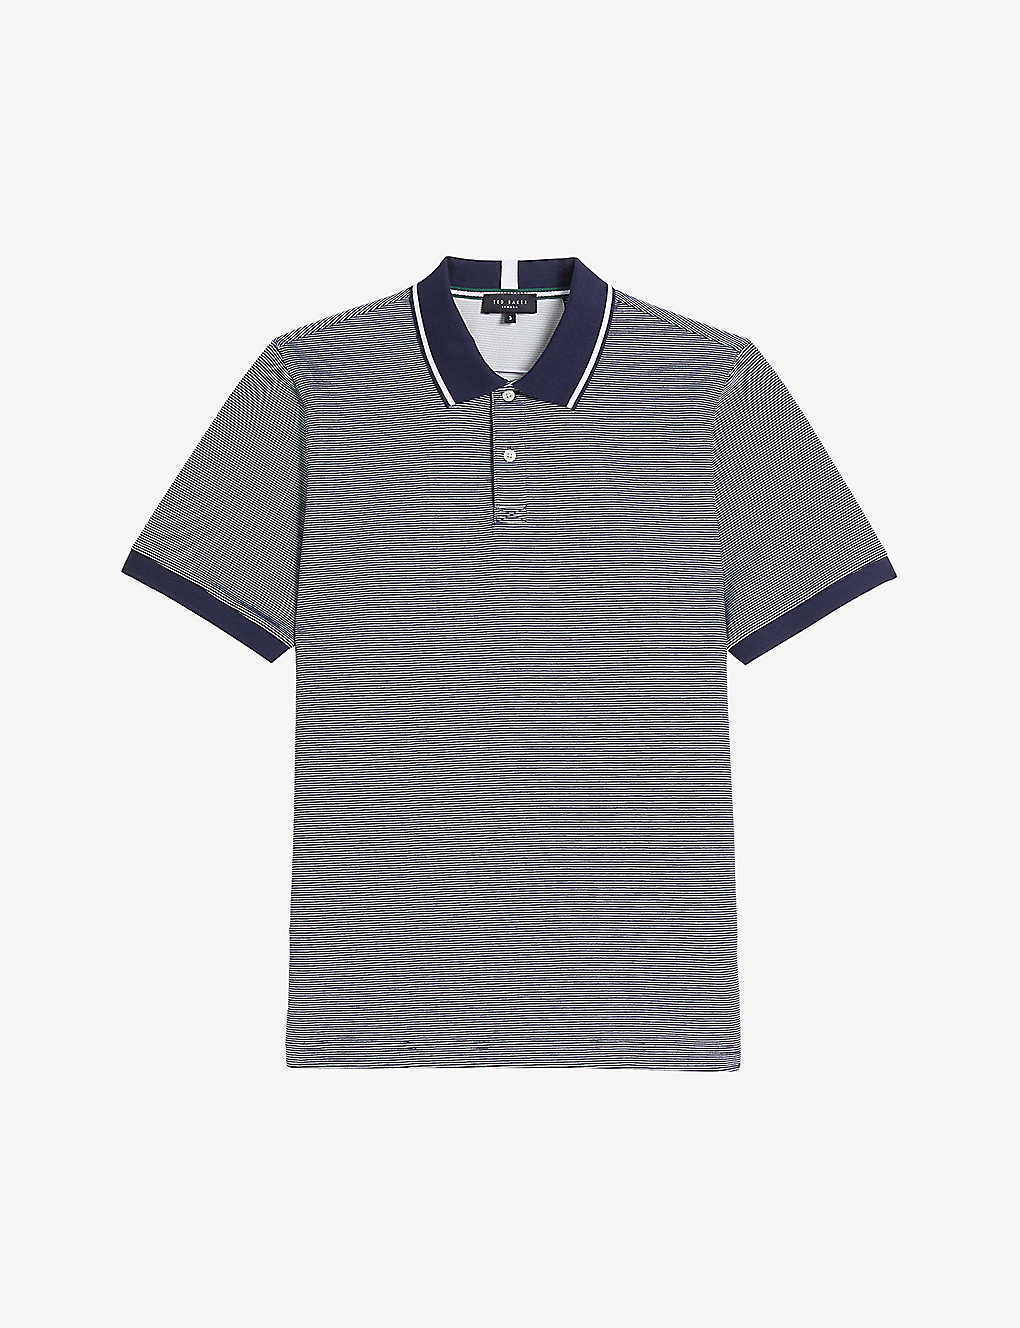 Ted Baker Mens Navy Ellerby Striped Woven Polo Shirt